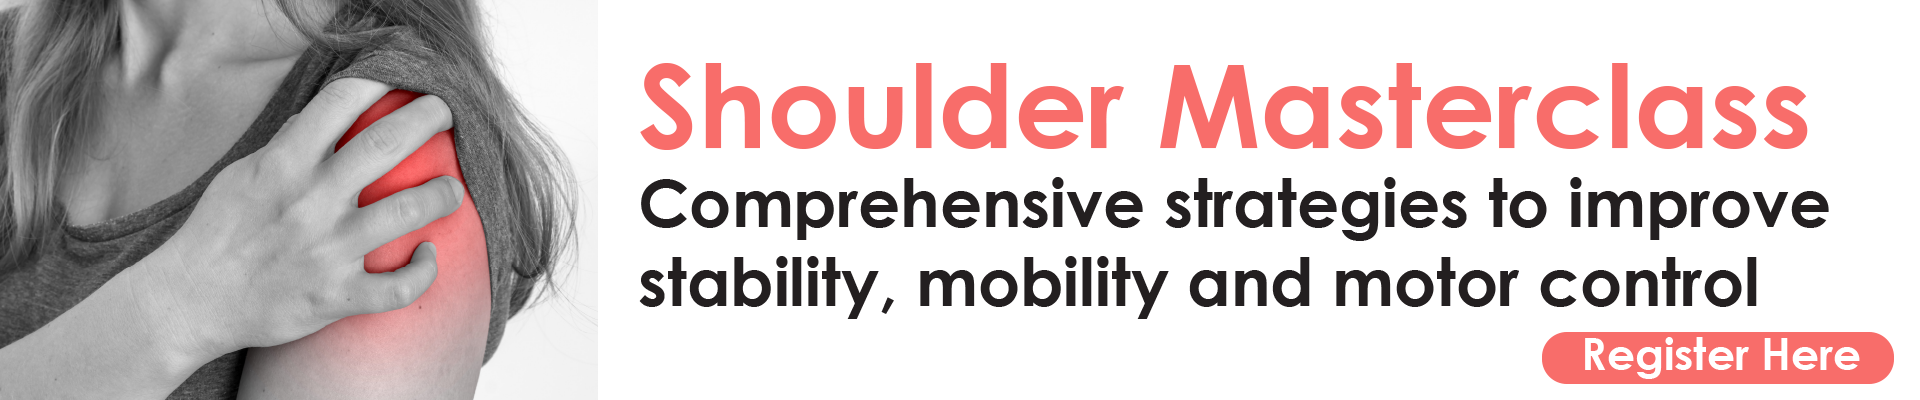 Shoulder Masterclass: Comprehensive Strategies to Improve Stability, Mobility and Motor Control